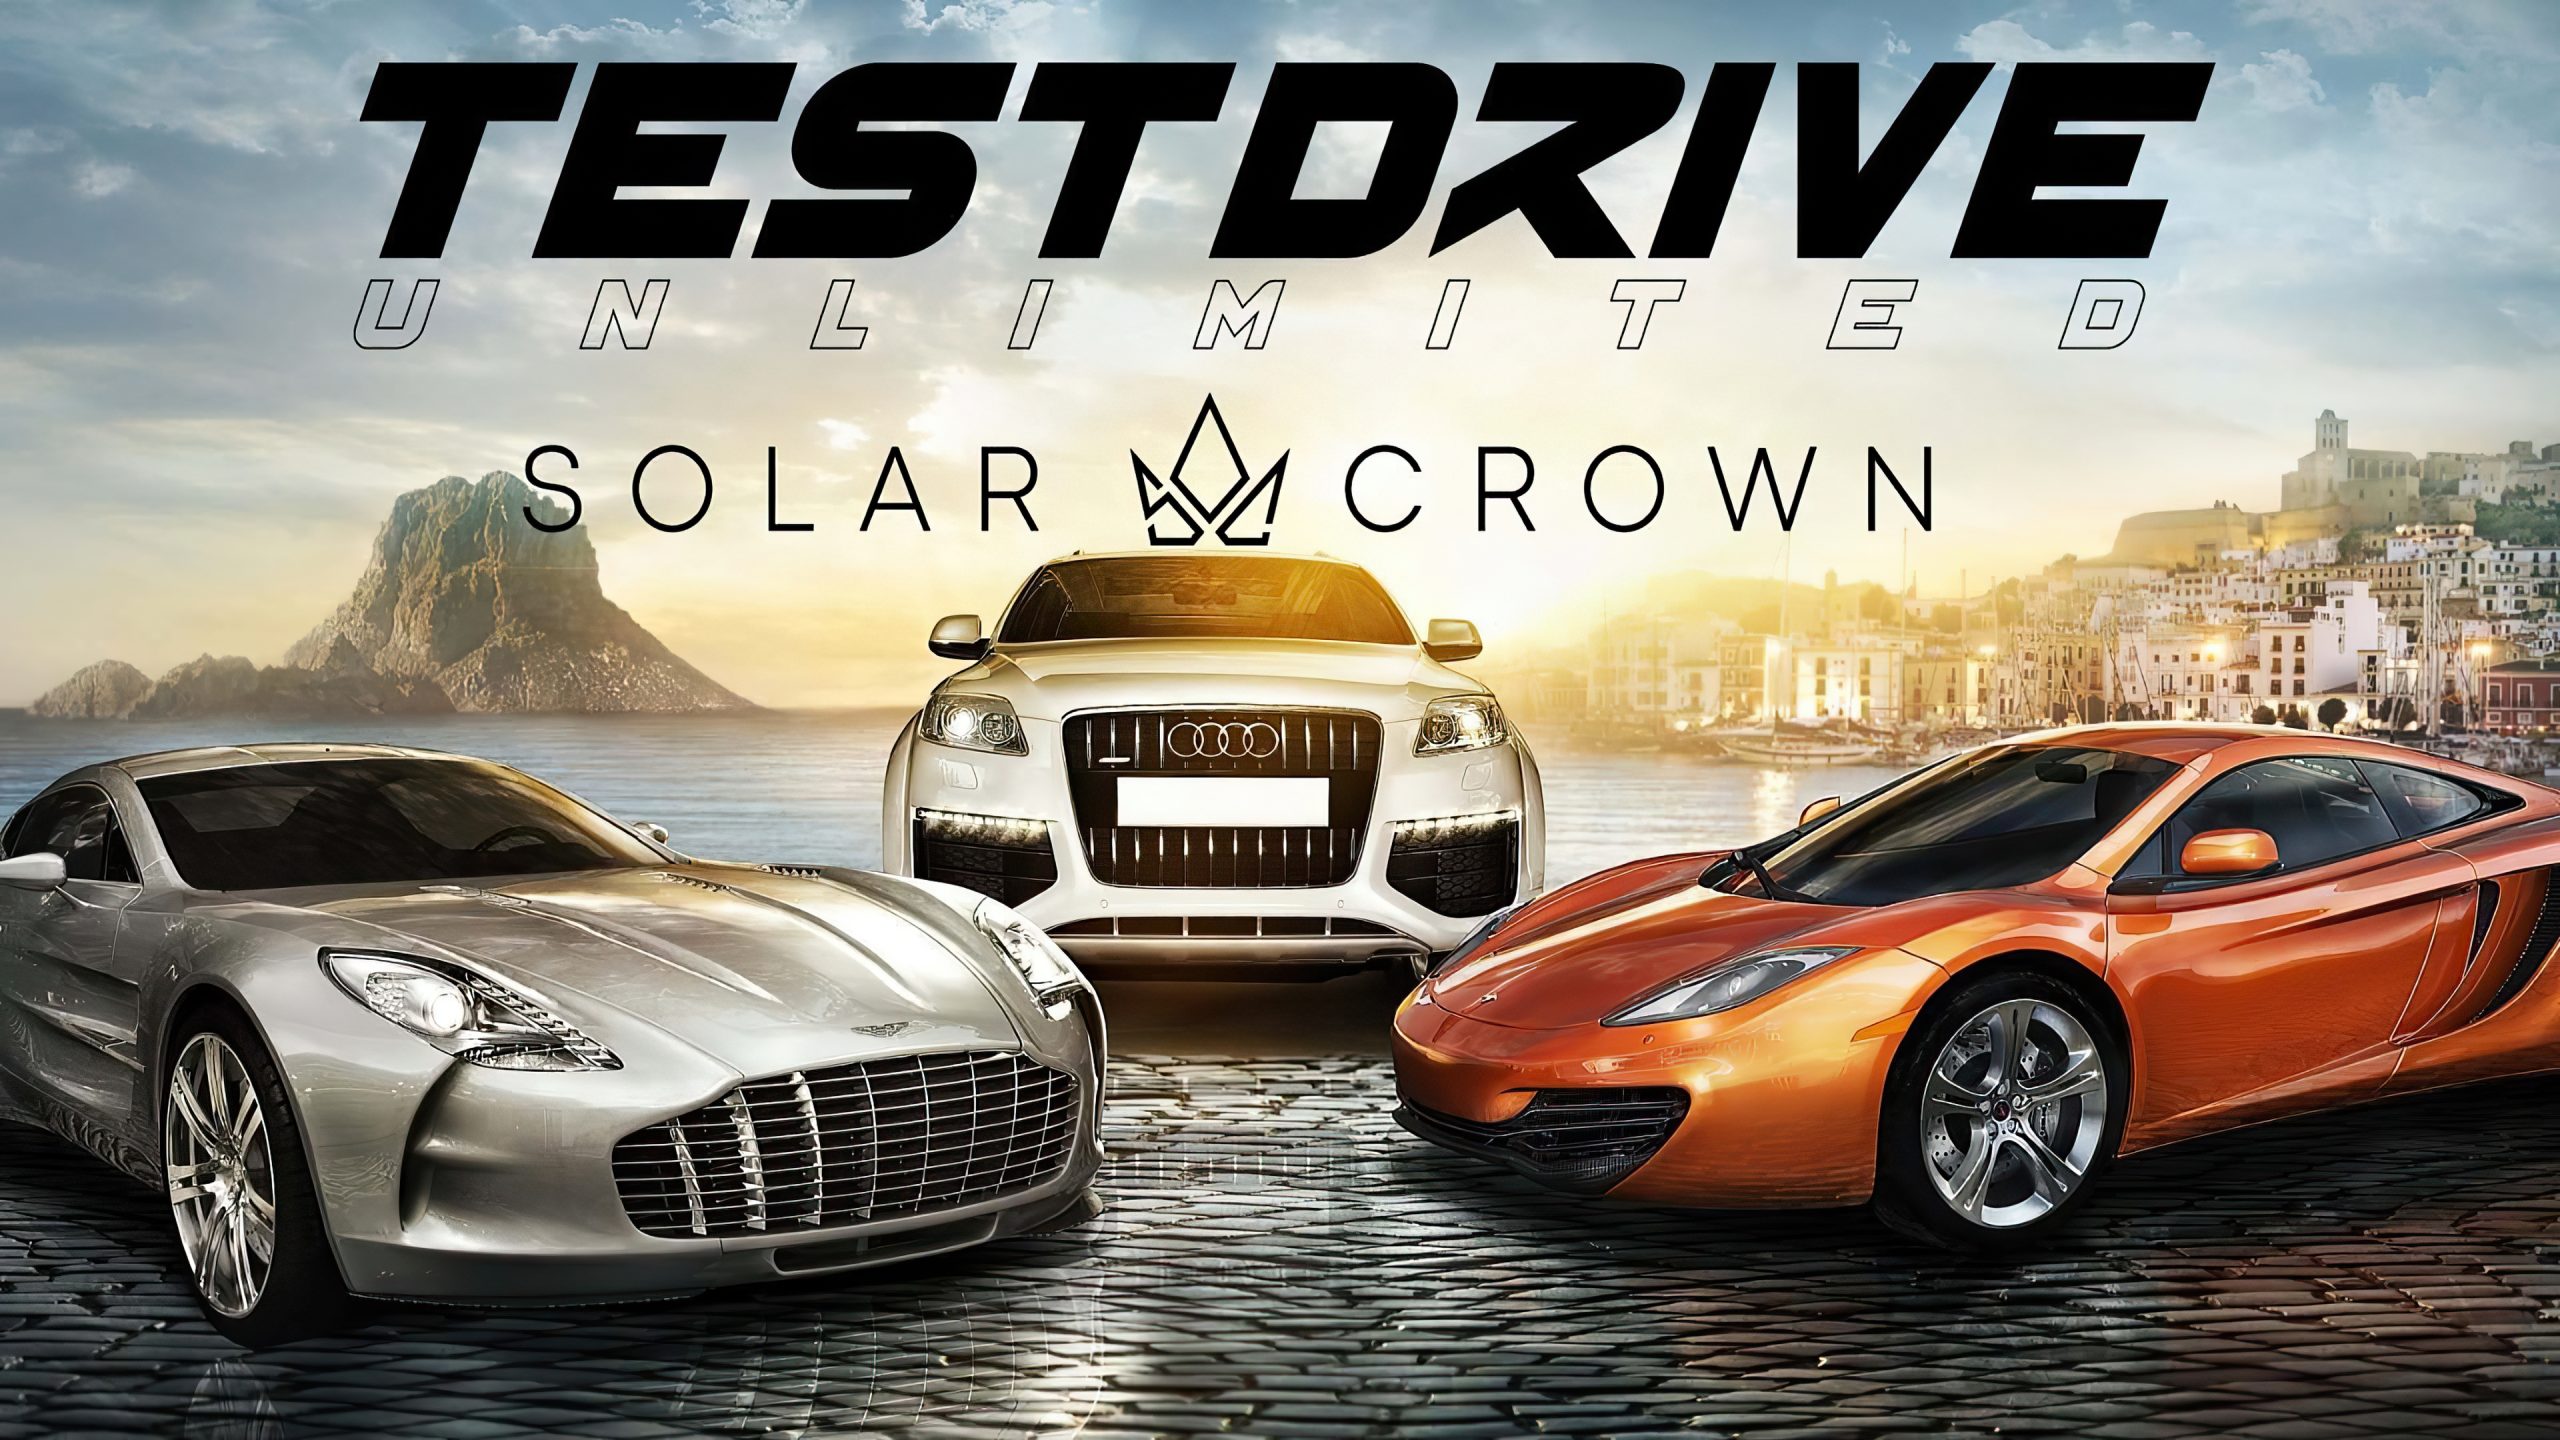 Test Drive Unlimited Solar Crown Art HD Scaled 